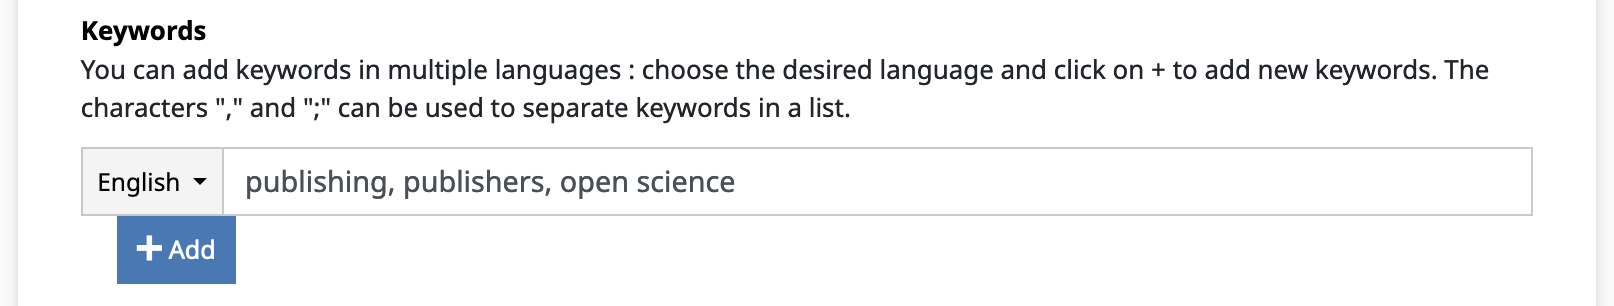 Adding a list of keywords separated by commas 